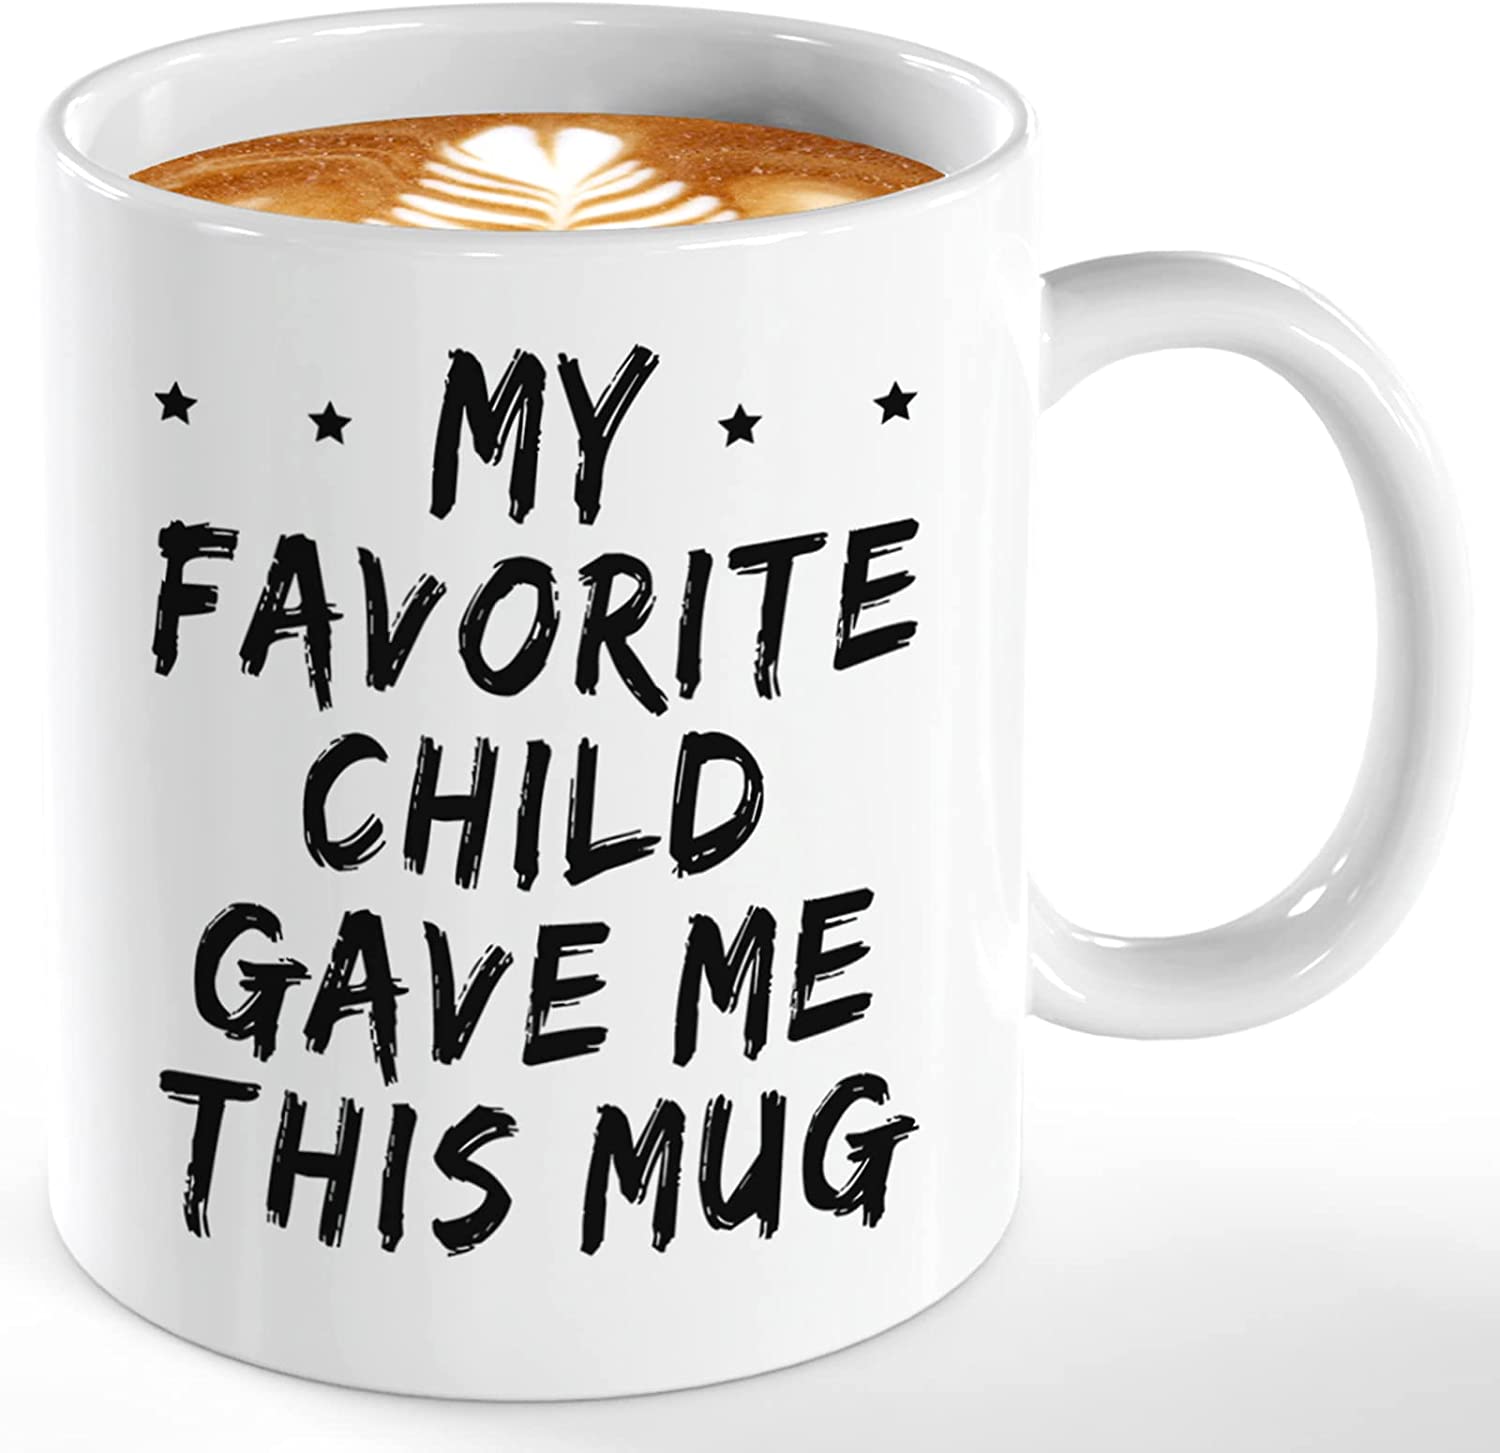 My Favorite Child Gave Me This Funny Coffee Mug – Best Dad & Mom Gifts, Gag Father’s Day Mothers Day Present Idea from Daughter, Son, Kids, Christmas Birthday Funny Gift for Parents, White 11 Oz